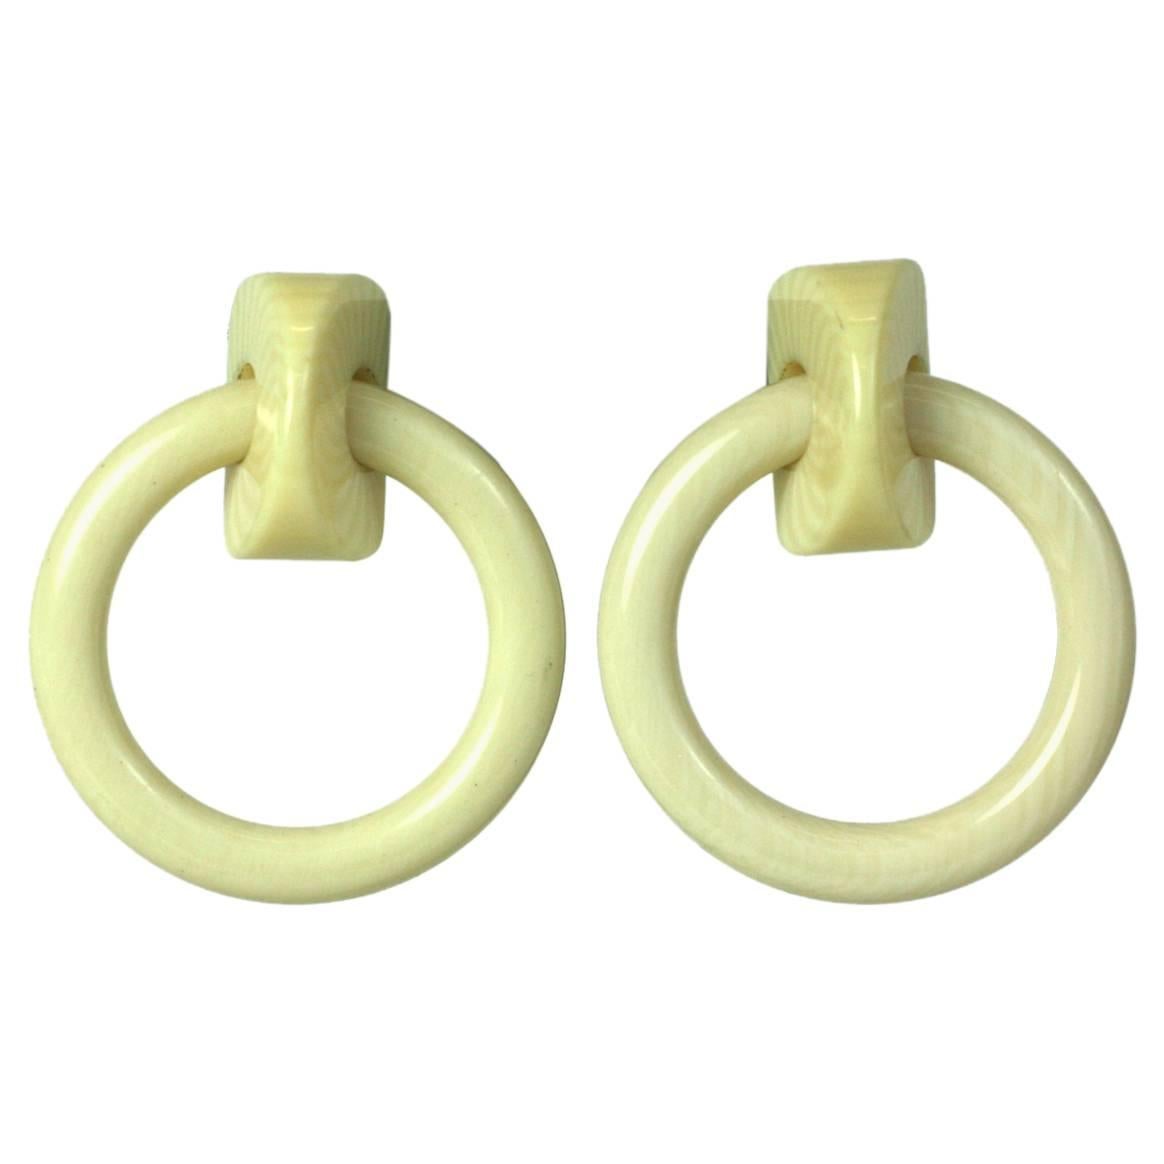 French Celluloid Door Knocker Earclips For Sale